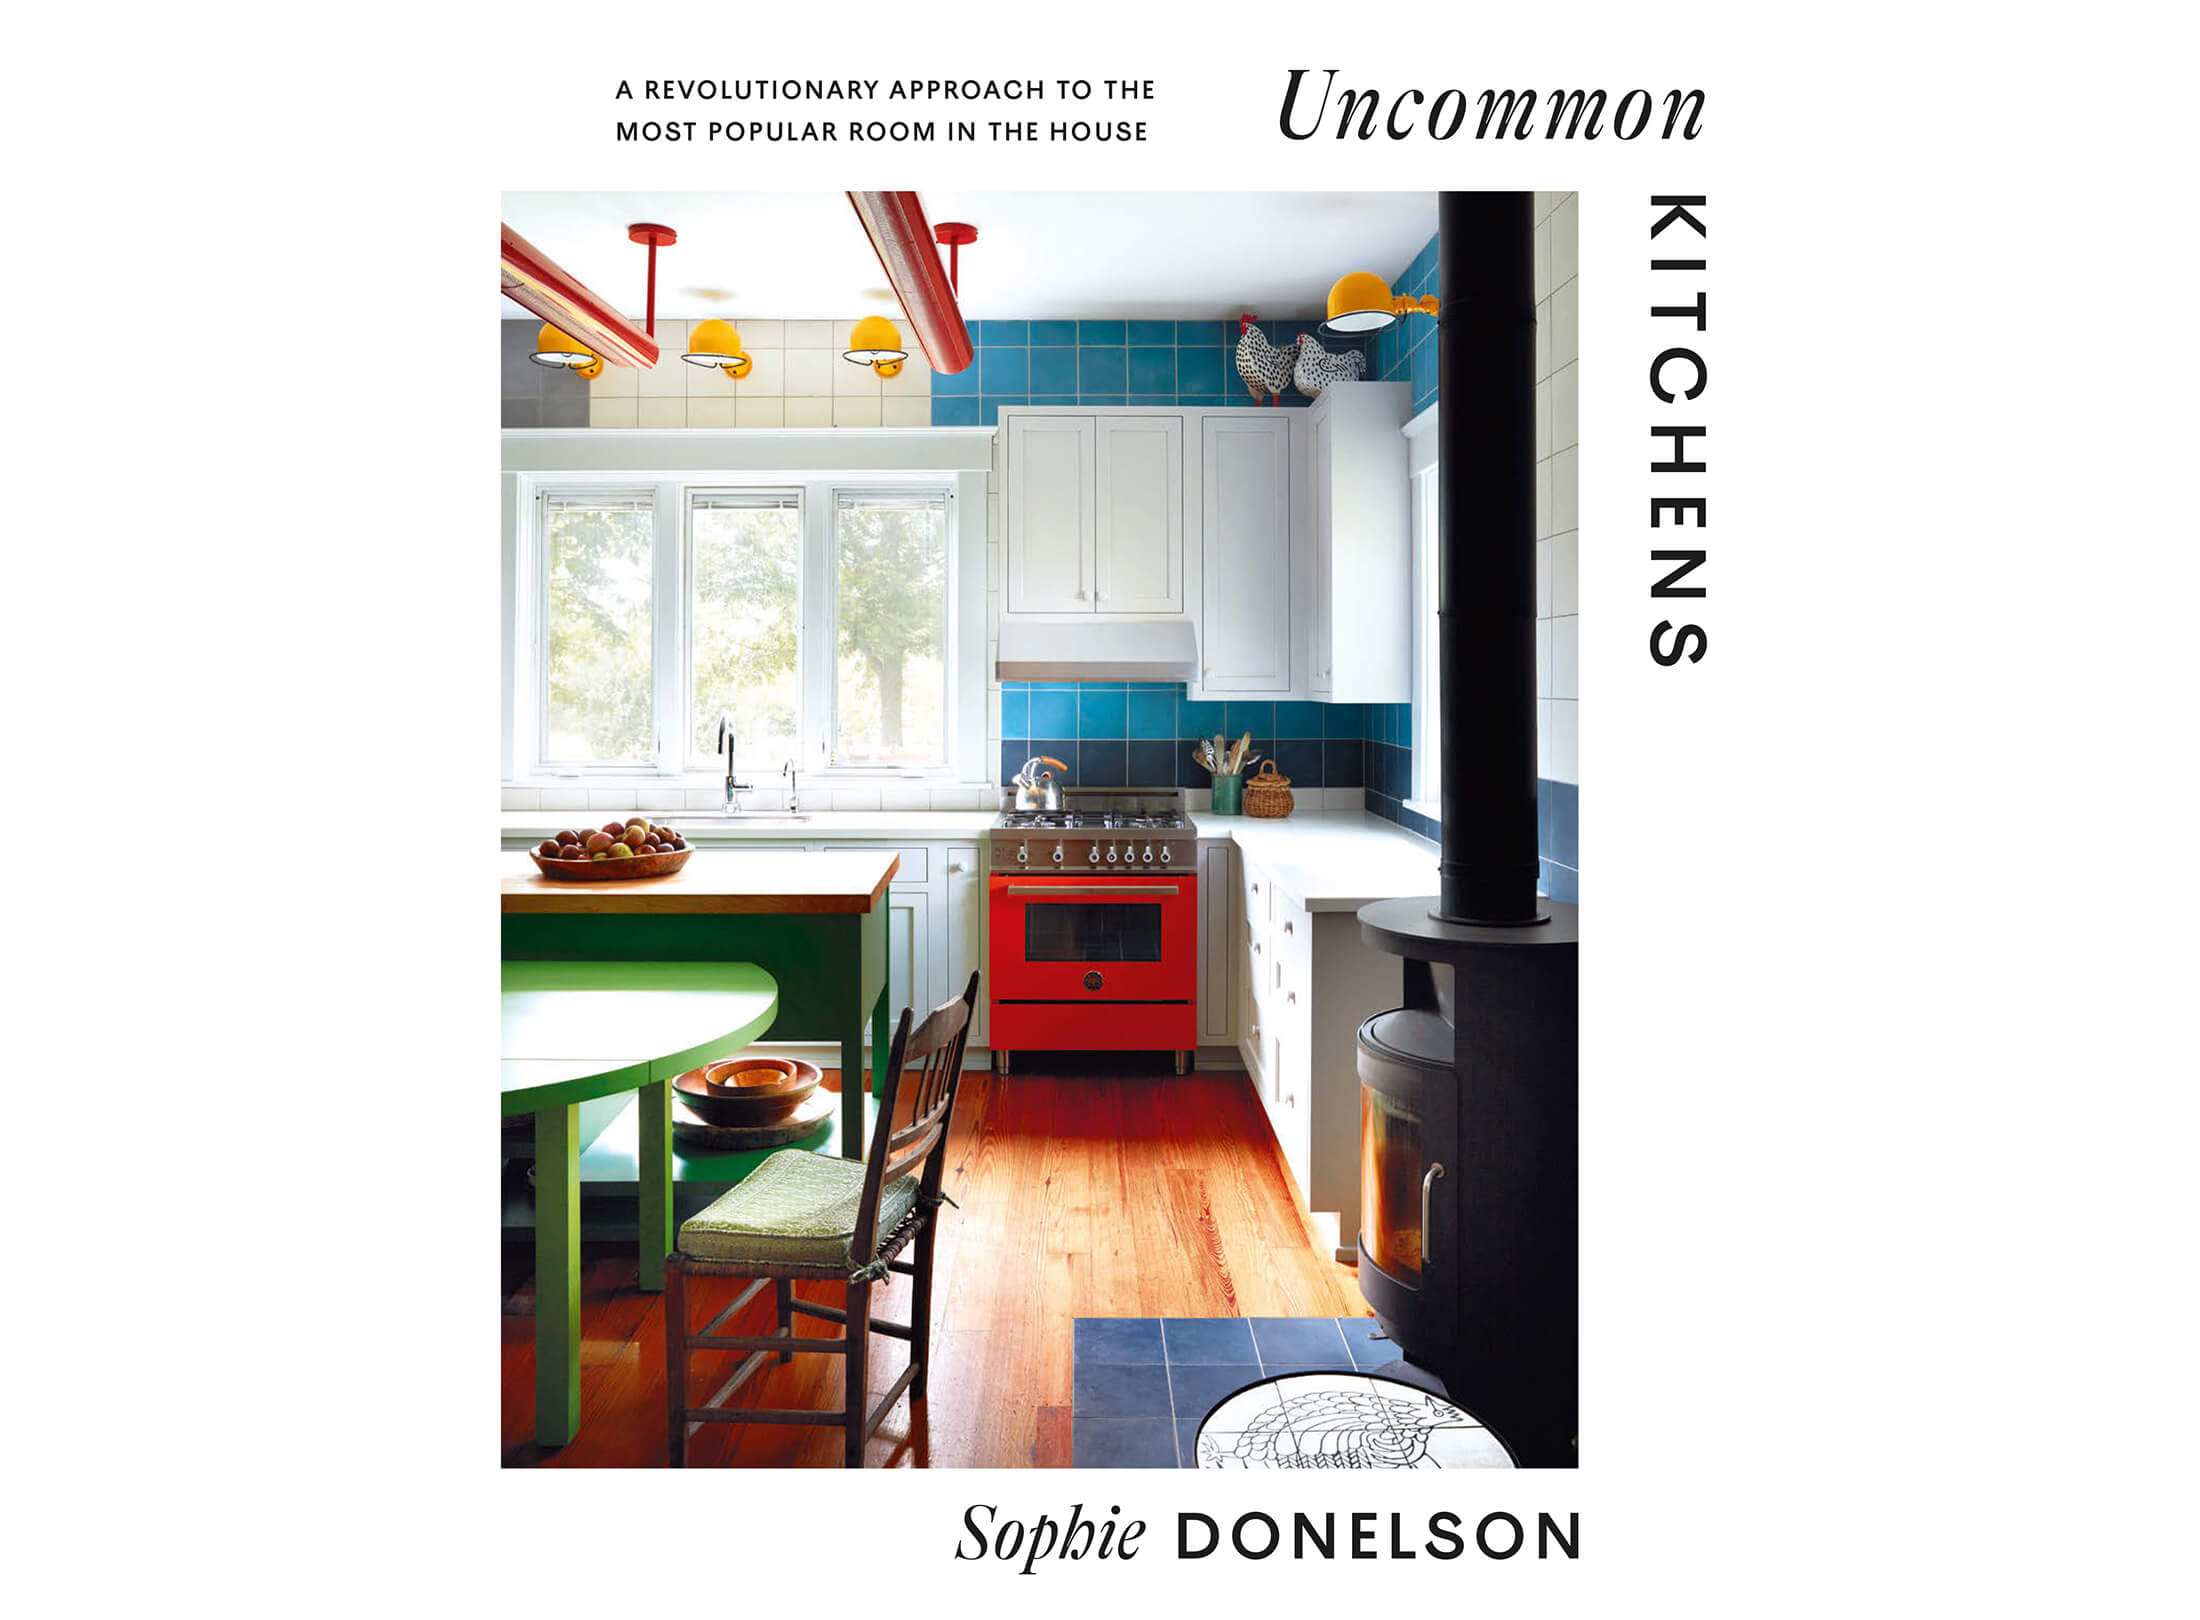 book cover showing a colorful kitchen